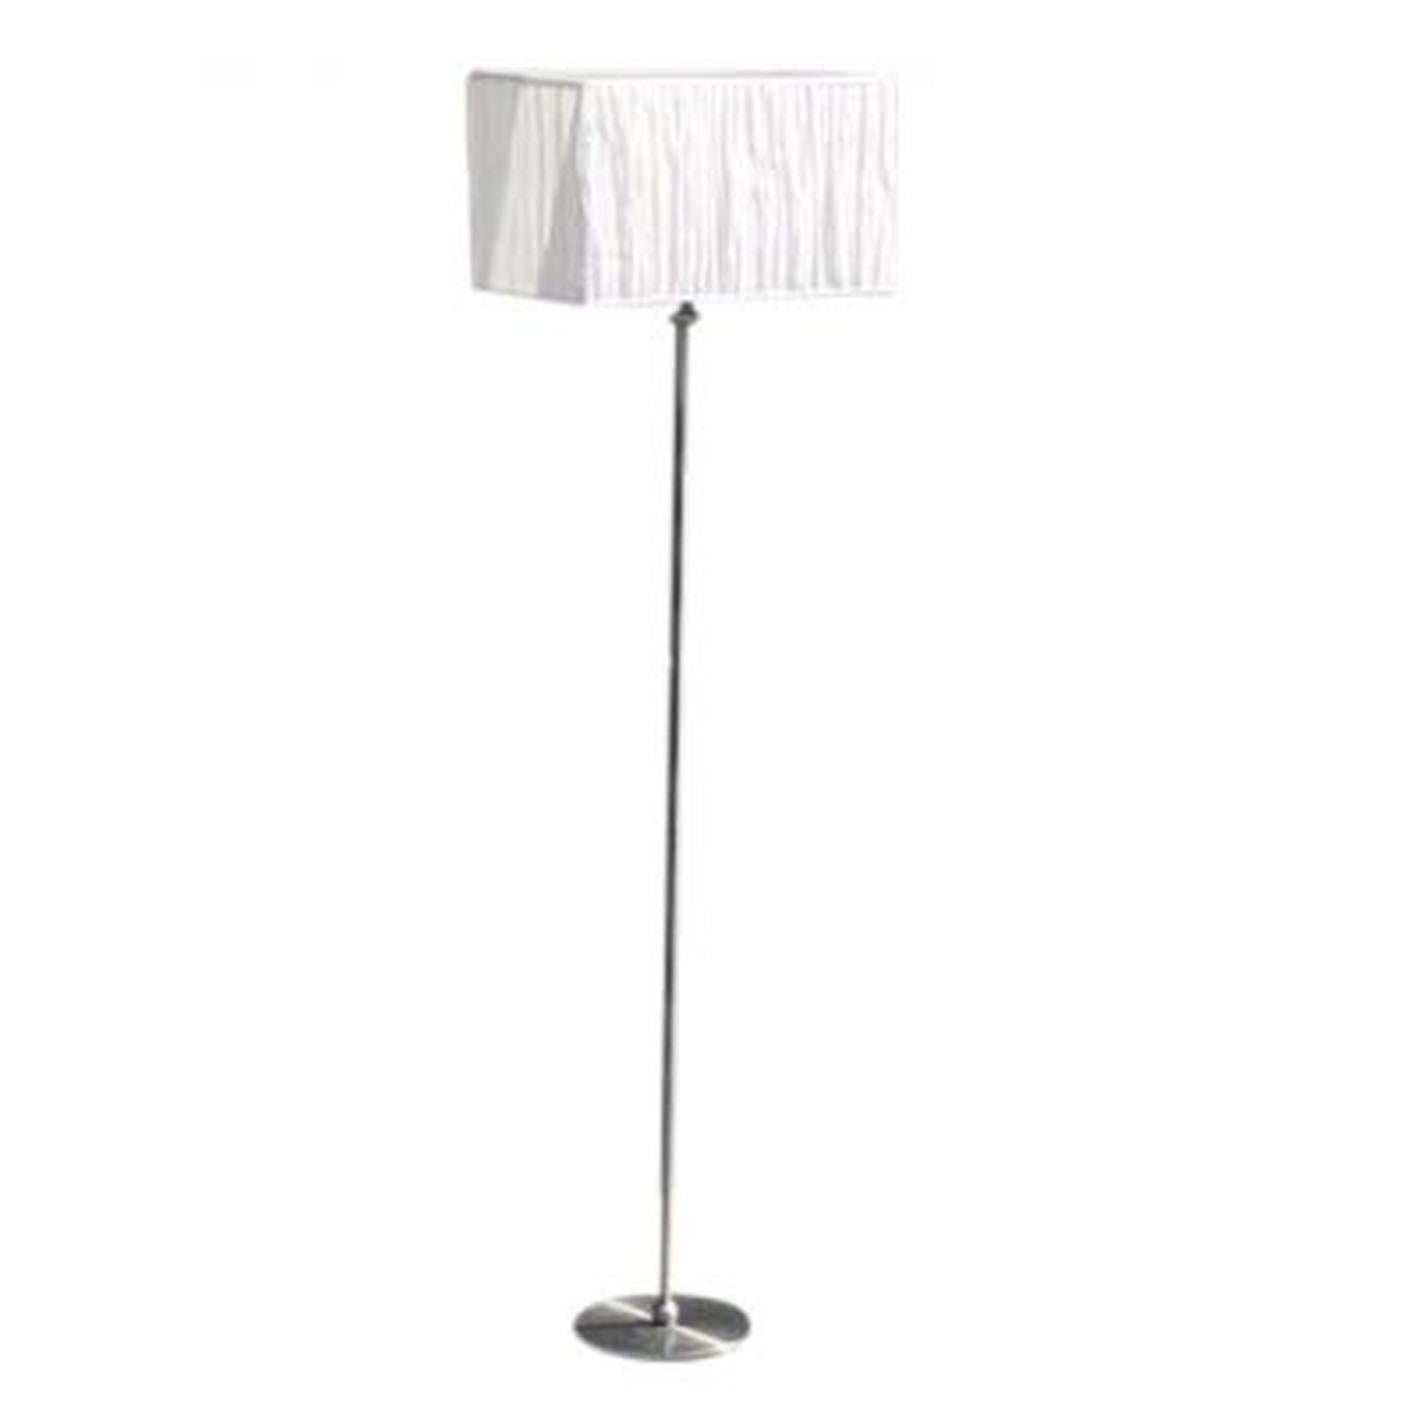 A silver, vintage Mid-Century Modern Swedish floor lamp with a white shade, made of hand crafted stainless steel. The Scandinavian golvlampa was produced by Konsthantverk, featuring a one light socket in good condition. Model 2792, Lot 2746-1. The